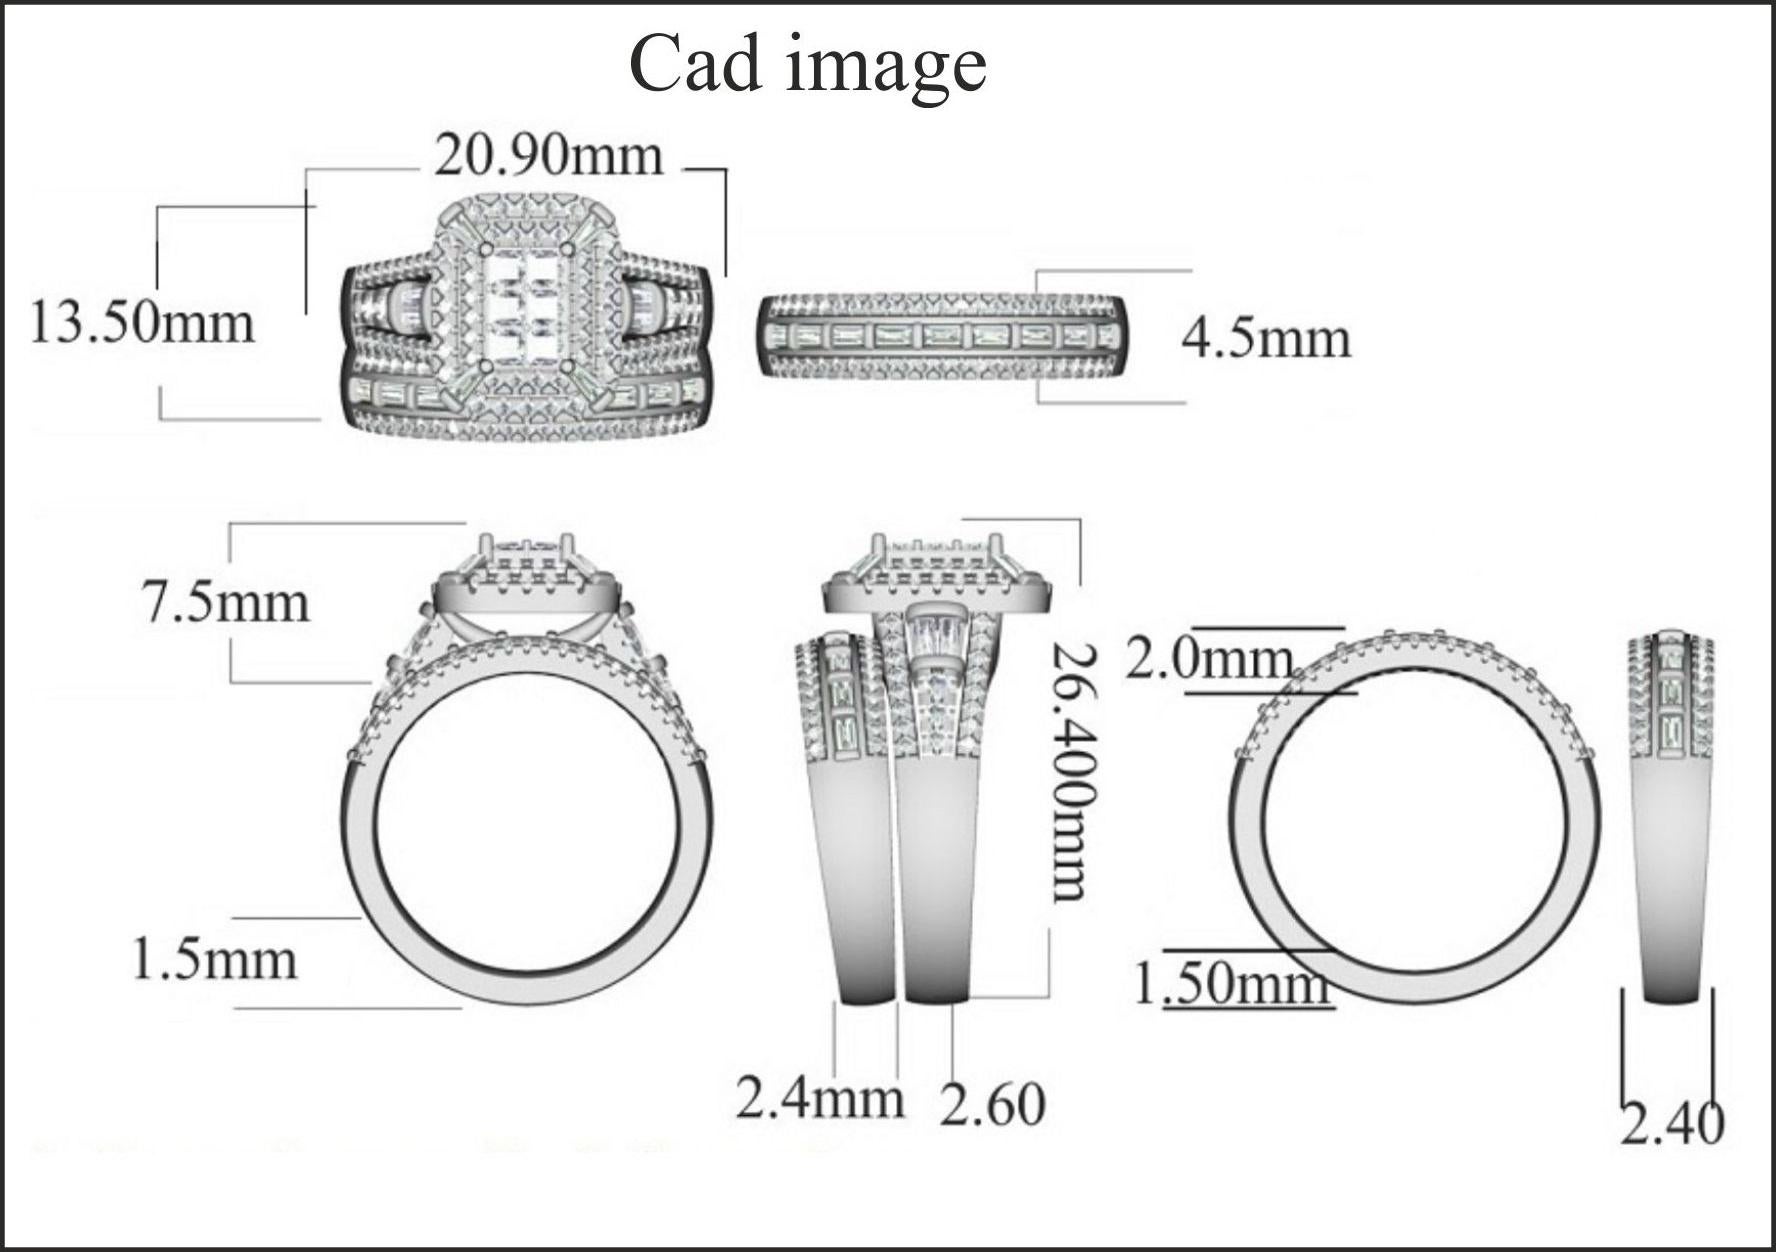 Exquisite 14K white gold 1.50 carat diamonds frame bridal set ring. Expertly Crafted of sparkling 14 karat solid white gold in high polish finish and set with 128 sparkling round, 17 baguette and 6 princess-cut white diamond set in micro prong,